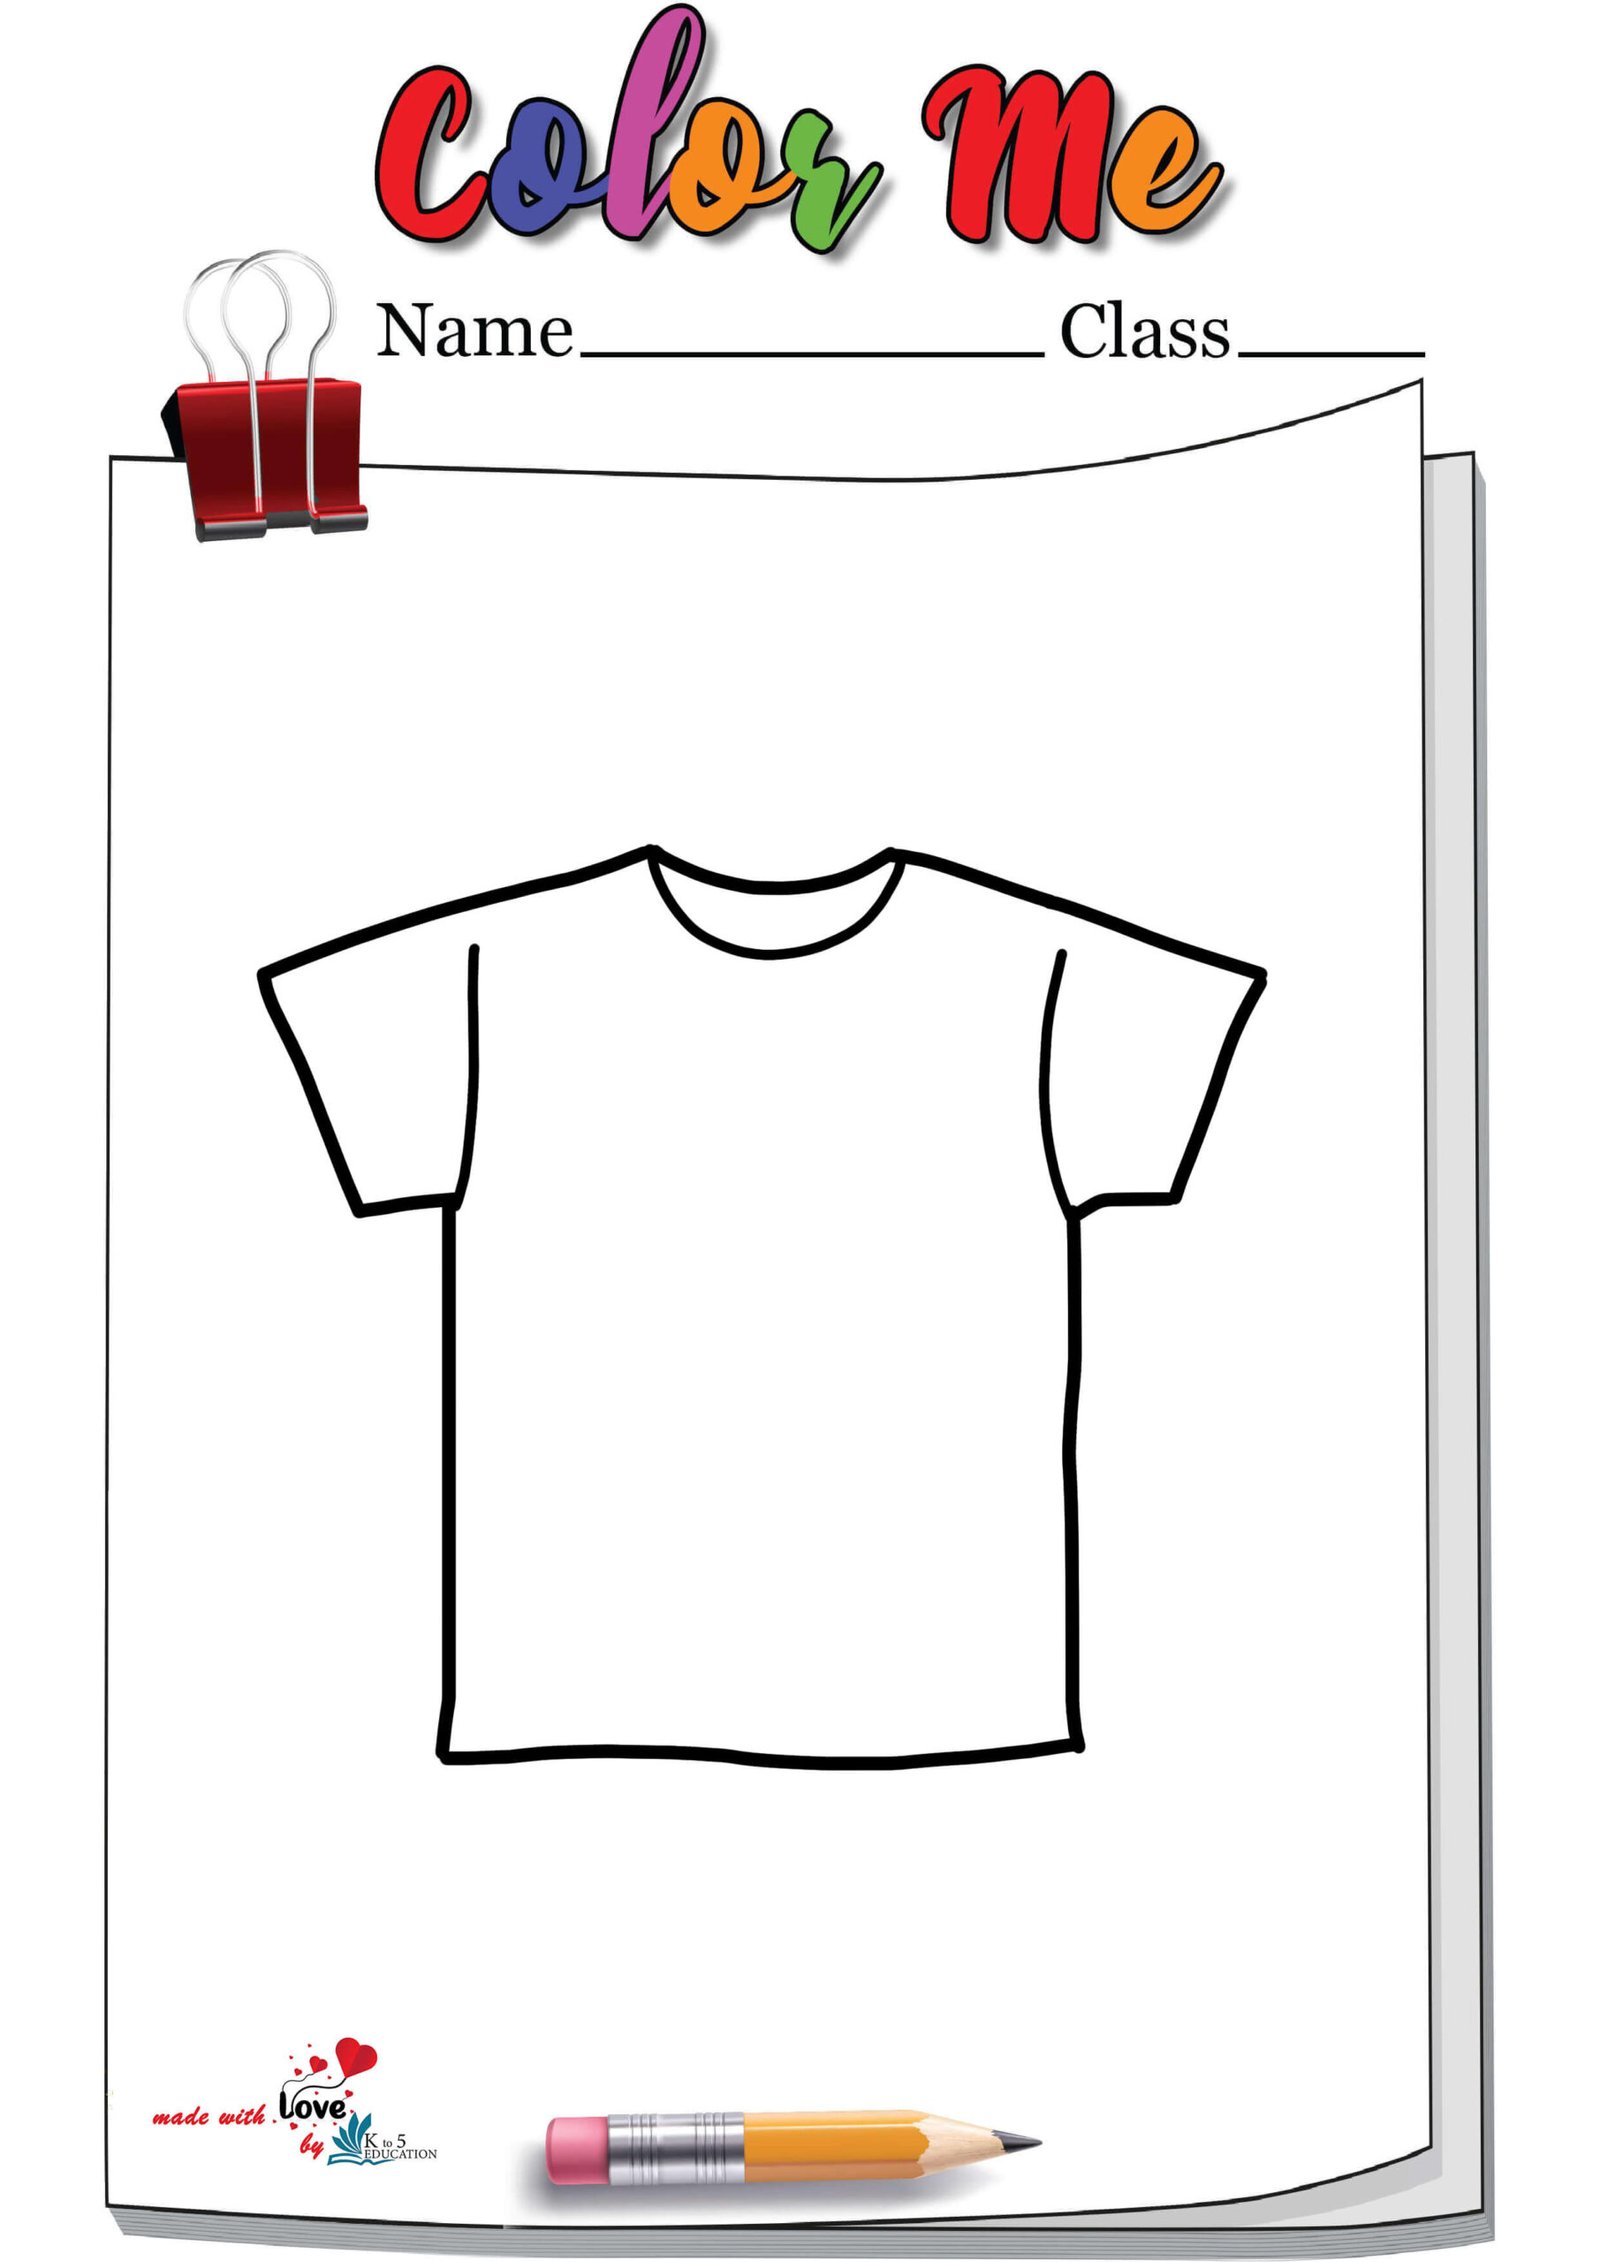 Baby T-shirt Coloring Page